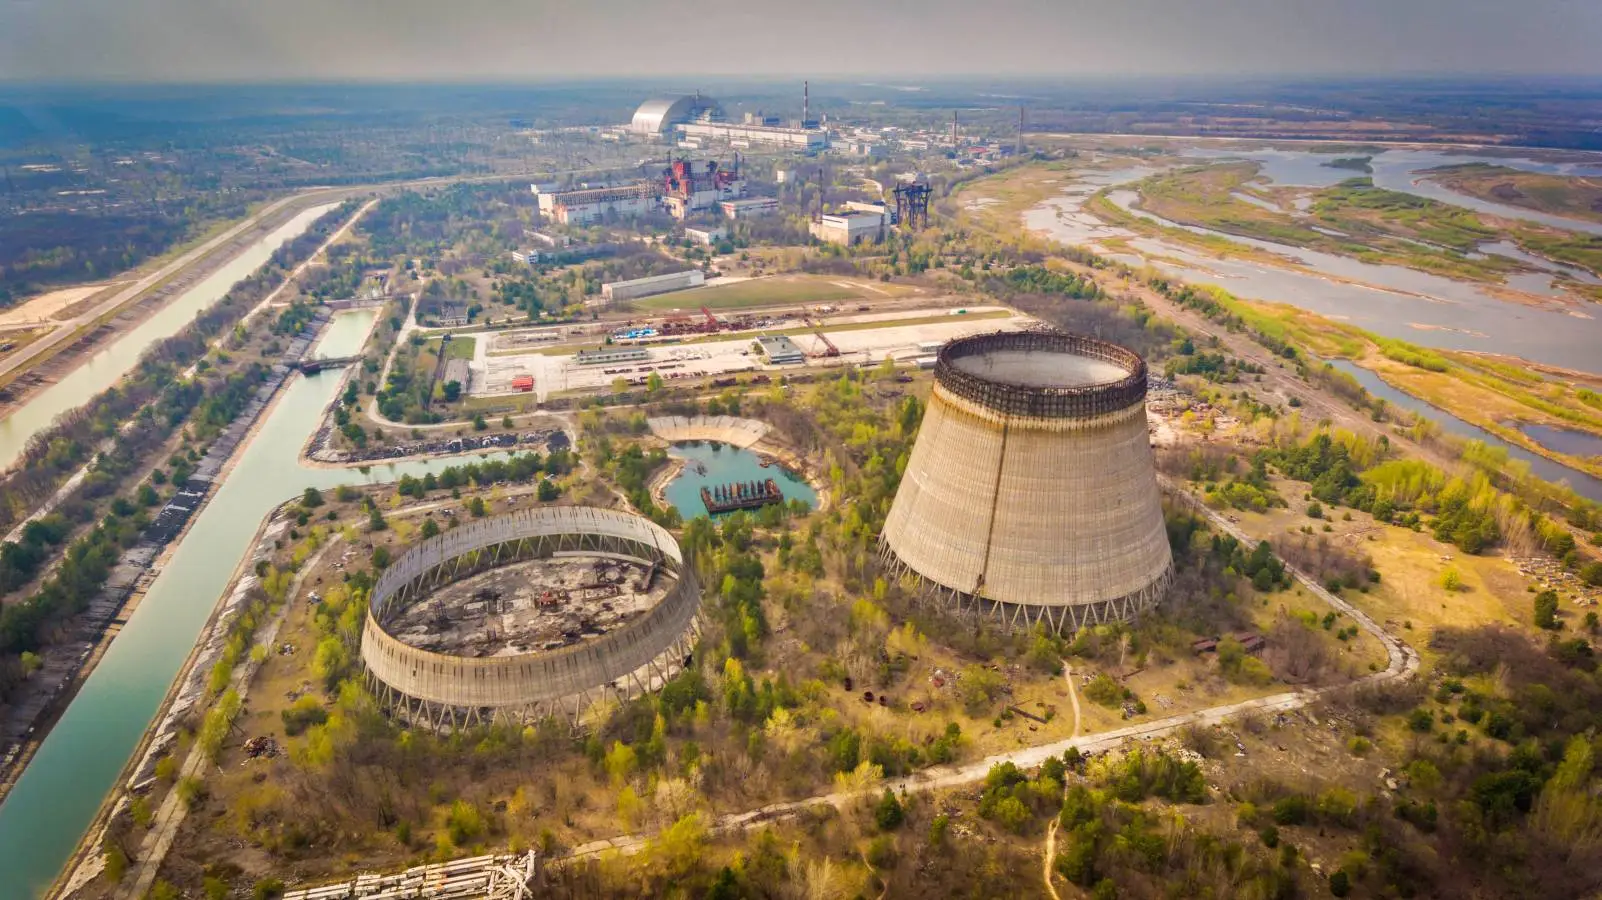 Alert near the Zaporozhye Nuclear Power Plant, Announcement Made by Ukraine